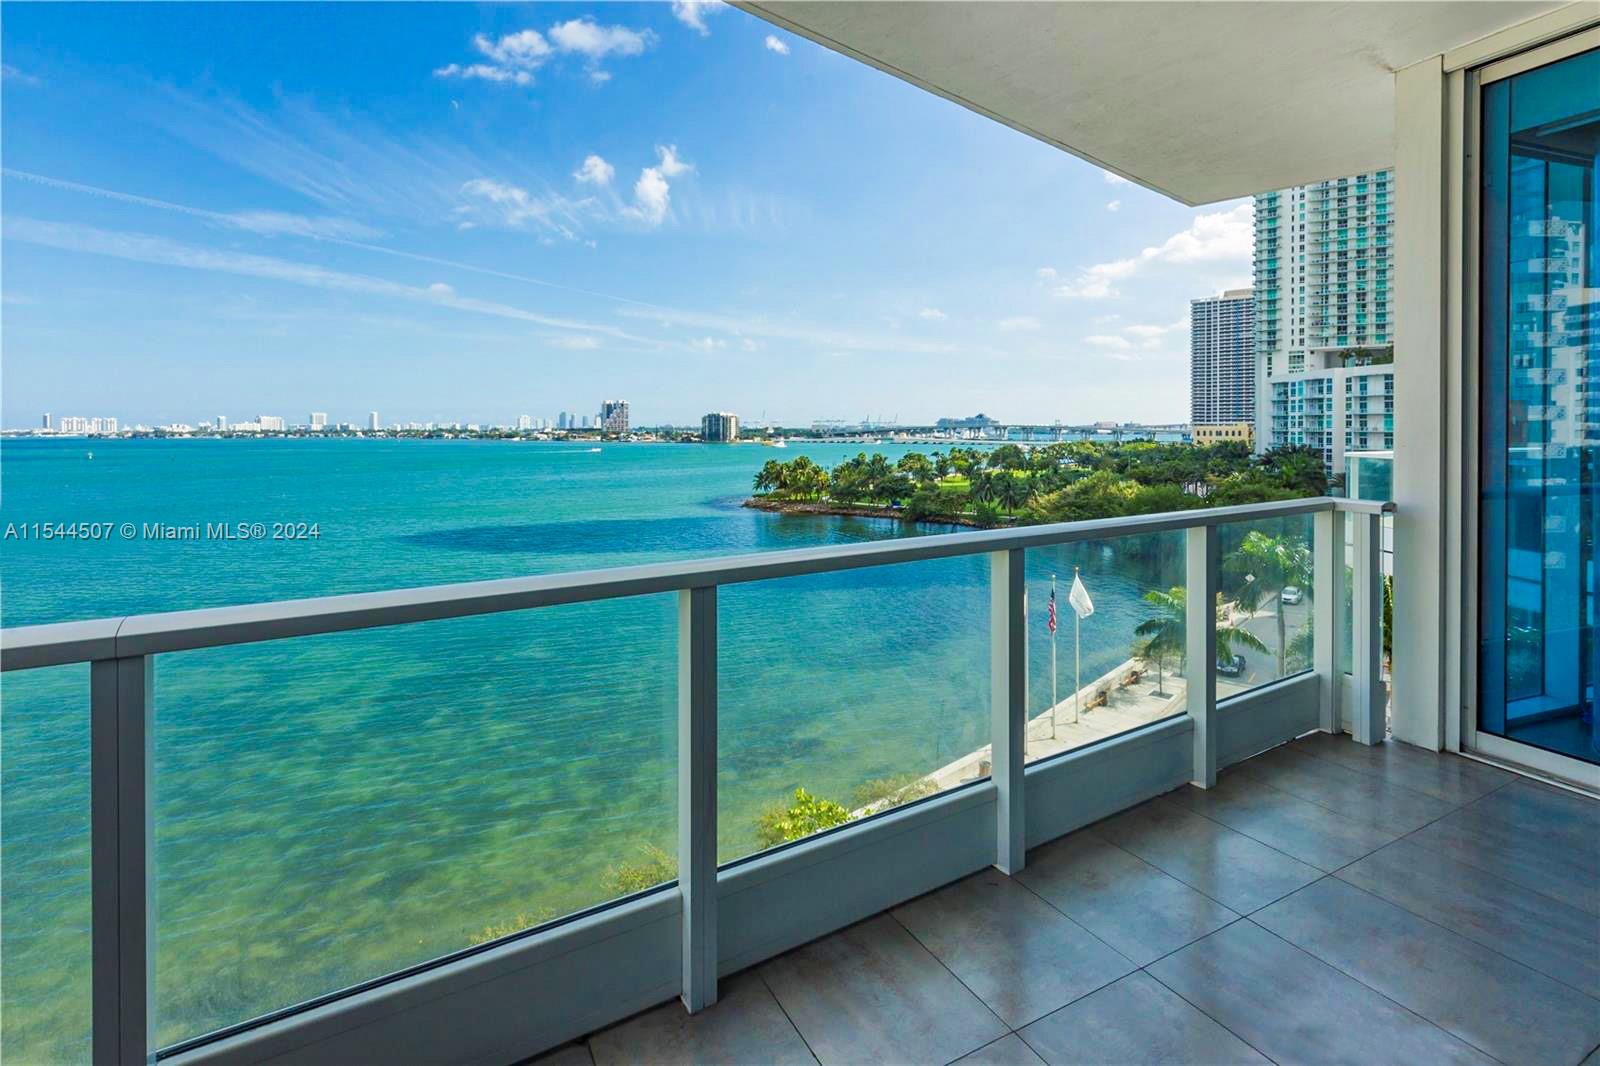 Corner unit w/ floor-to-ceiling windows at the elegant Paramount Bay condo. Unobstructed direct bay views of Biscayne Bay & Miami Beach from this oversized turnkey 2 Bedroom / 2.5 bathroom. This residence has been upgraded throughout and features a private elevator entry, 10’ ceilings, a gorgeous 8’ deep terrace and Kohler Master Steam Shower with DTV-2 custom showering experience. The upgraded kitchen includes Sub Zero and Wolf appliances, a wine cooler and an open kitchen island. Porcelanosa tiled floors, recessed LED lighting, glass-sliding “barn” doors in master suite and much more. Live the ultimate lifestyle in this full service building. The Paramount Bay offers two pools along with cabanas, a state-of-the-art gym and many party rooms.

Tenant Occupied until April 2nd, 2024